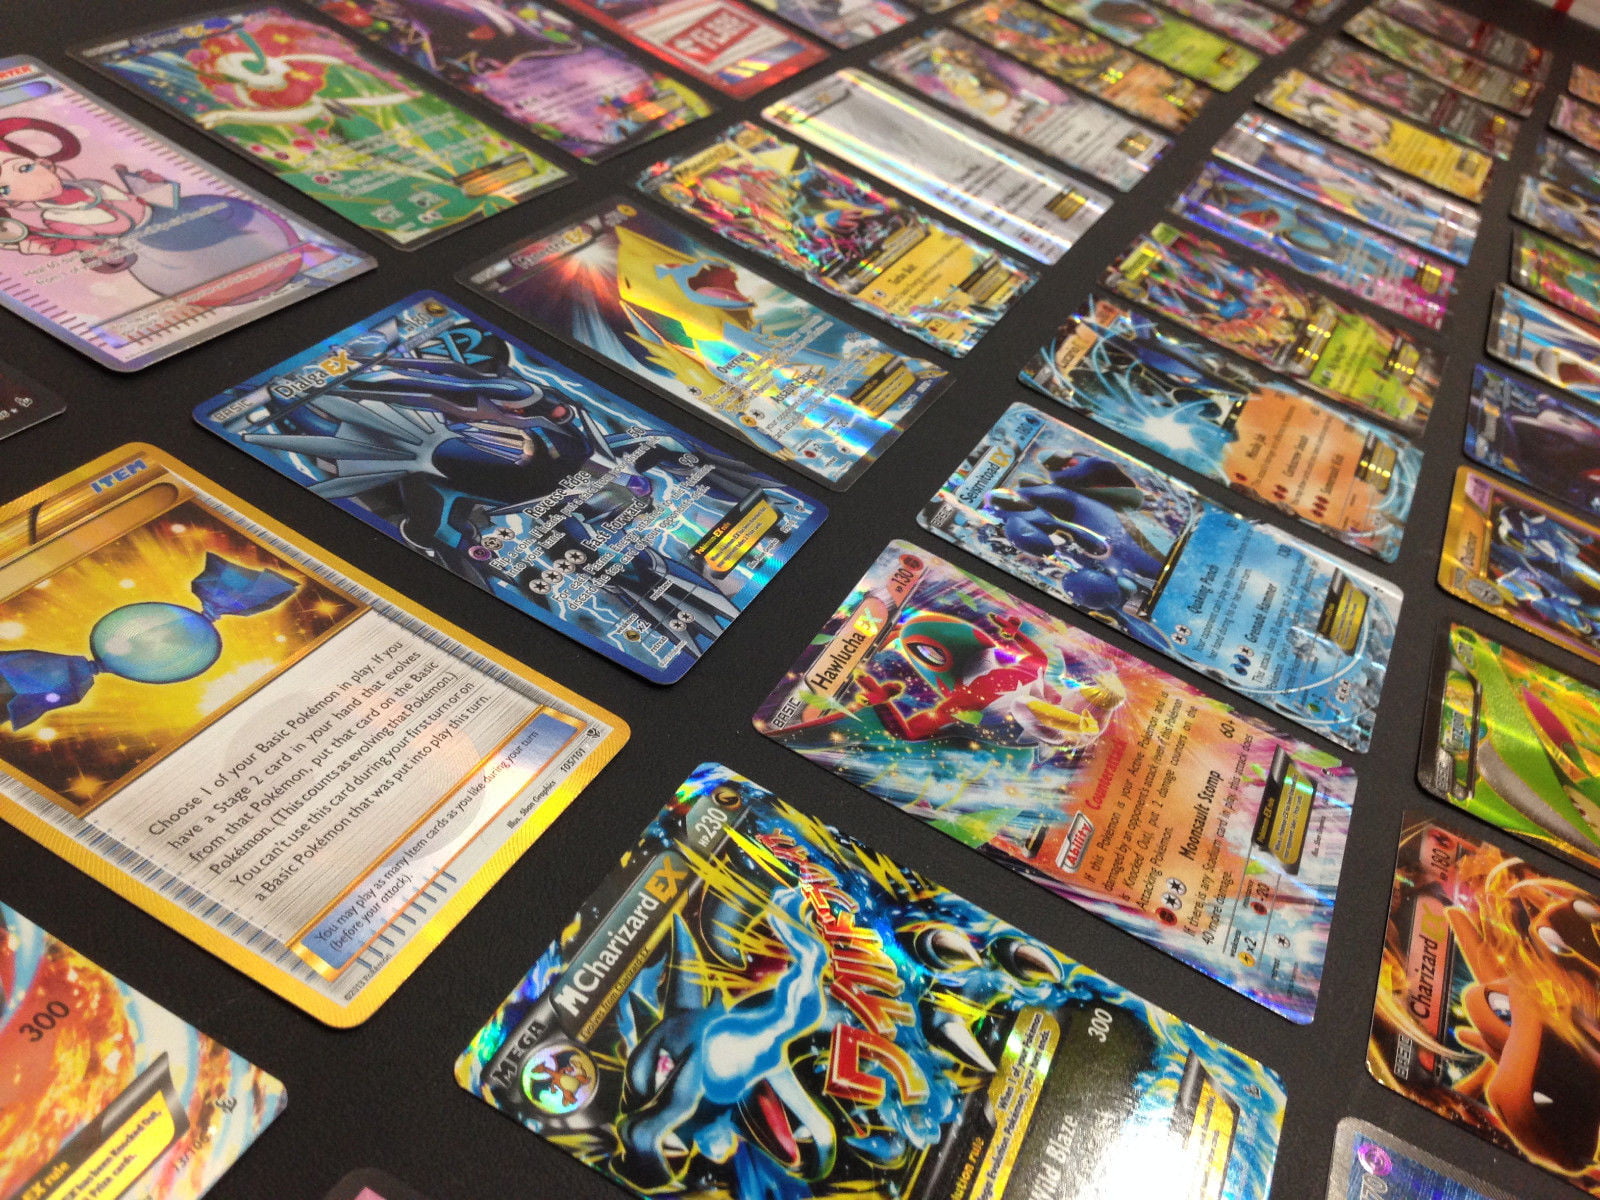 1 Energy 20 Mega TCG Style Card Holo EX Full Art : 20 GX 59 EX Arts,Toy Gifts ichwill 100 Assorted Poke Cards